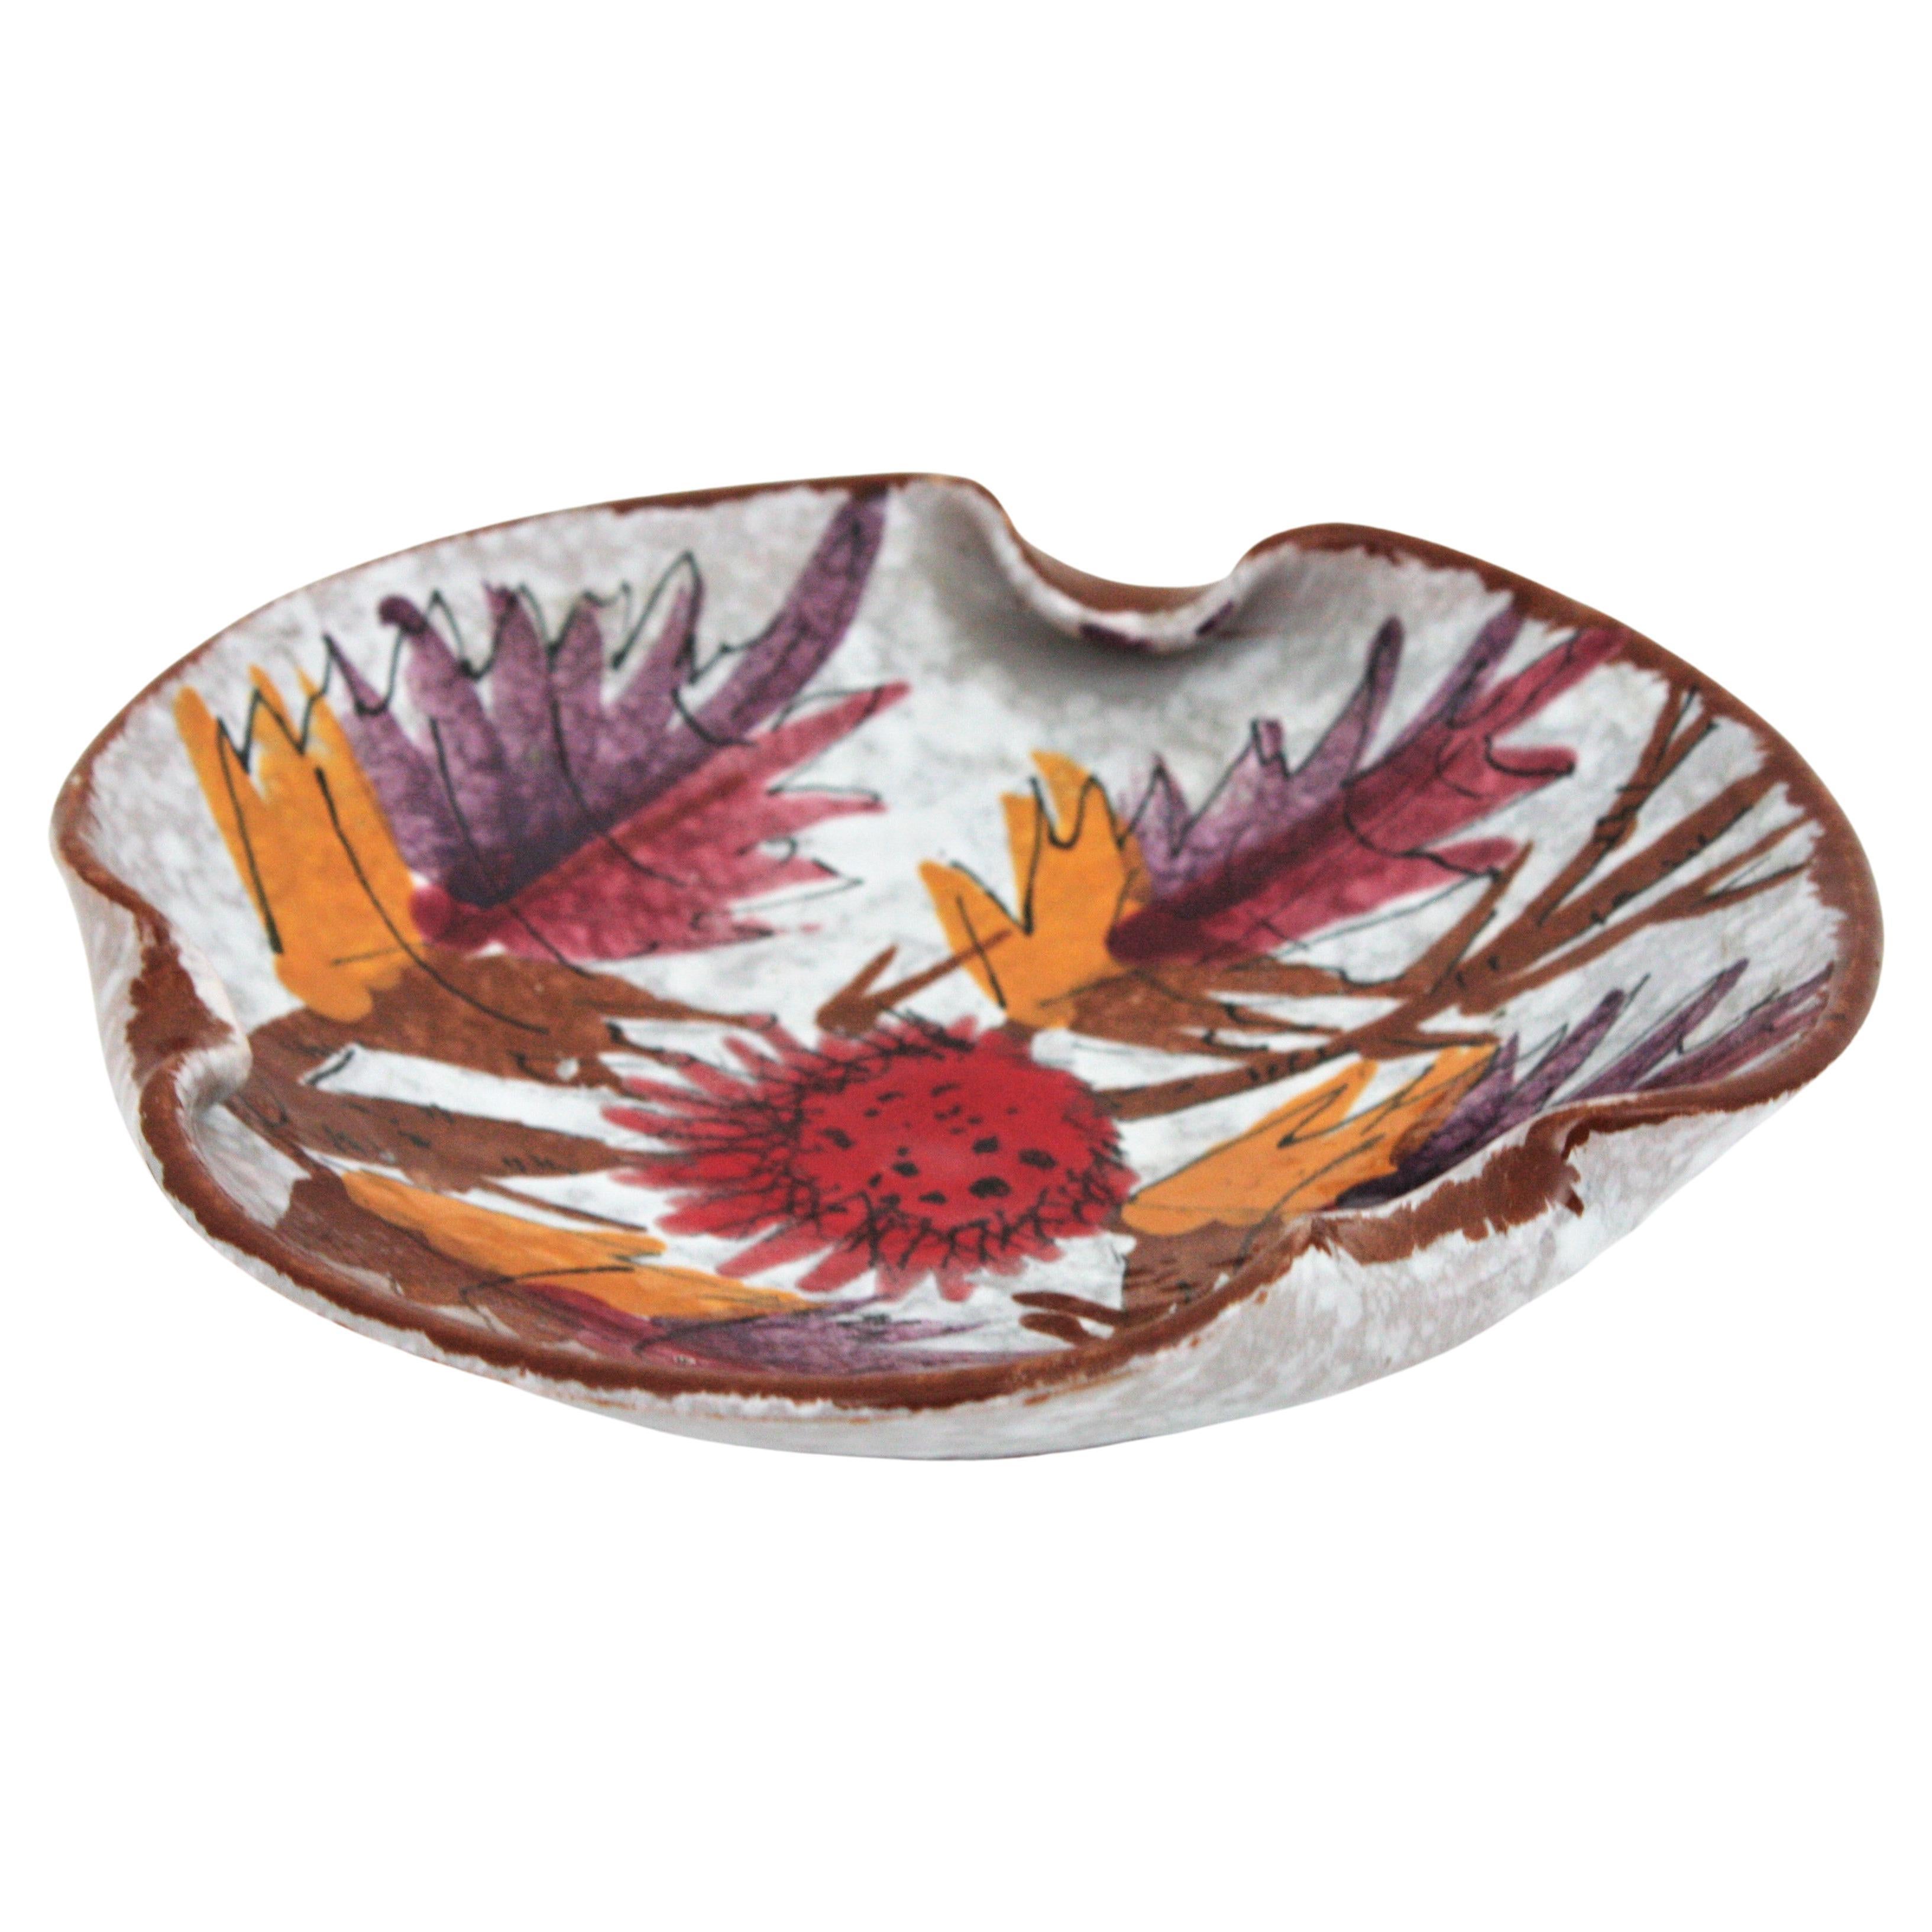 Beautiful decorative bowl, ashtray or videpoche in multicolor glazed terracotta. France, 1950s.
It has an eye-catching design with leaf decorations in shades of pink, purple and orange on a white background.
It has cigarrette holders to use it as